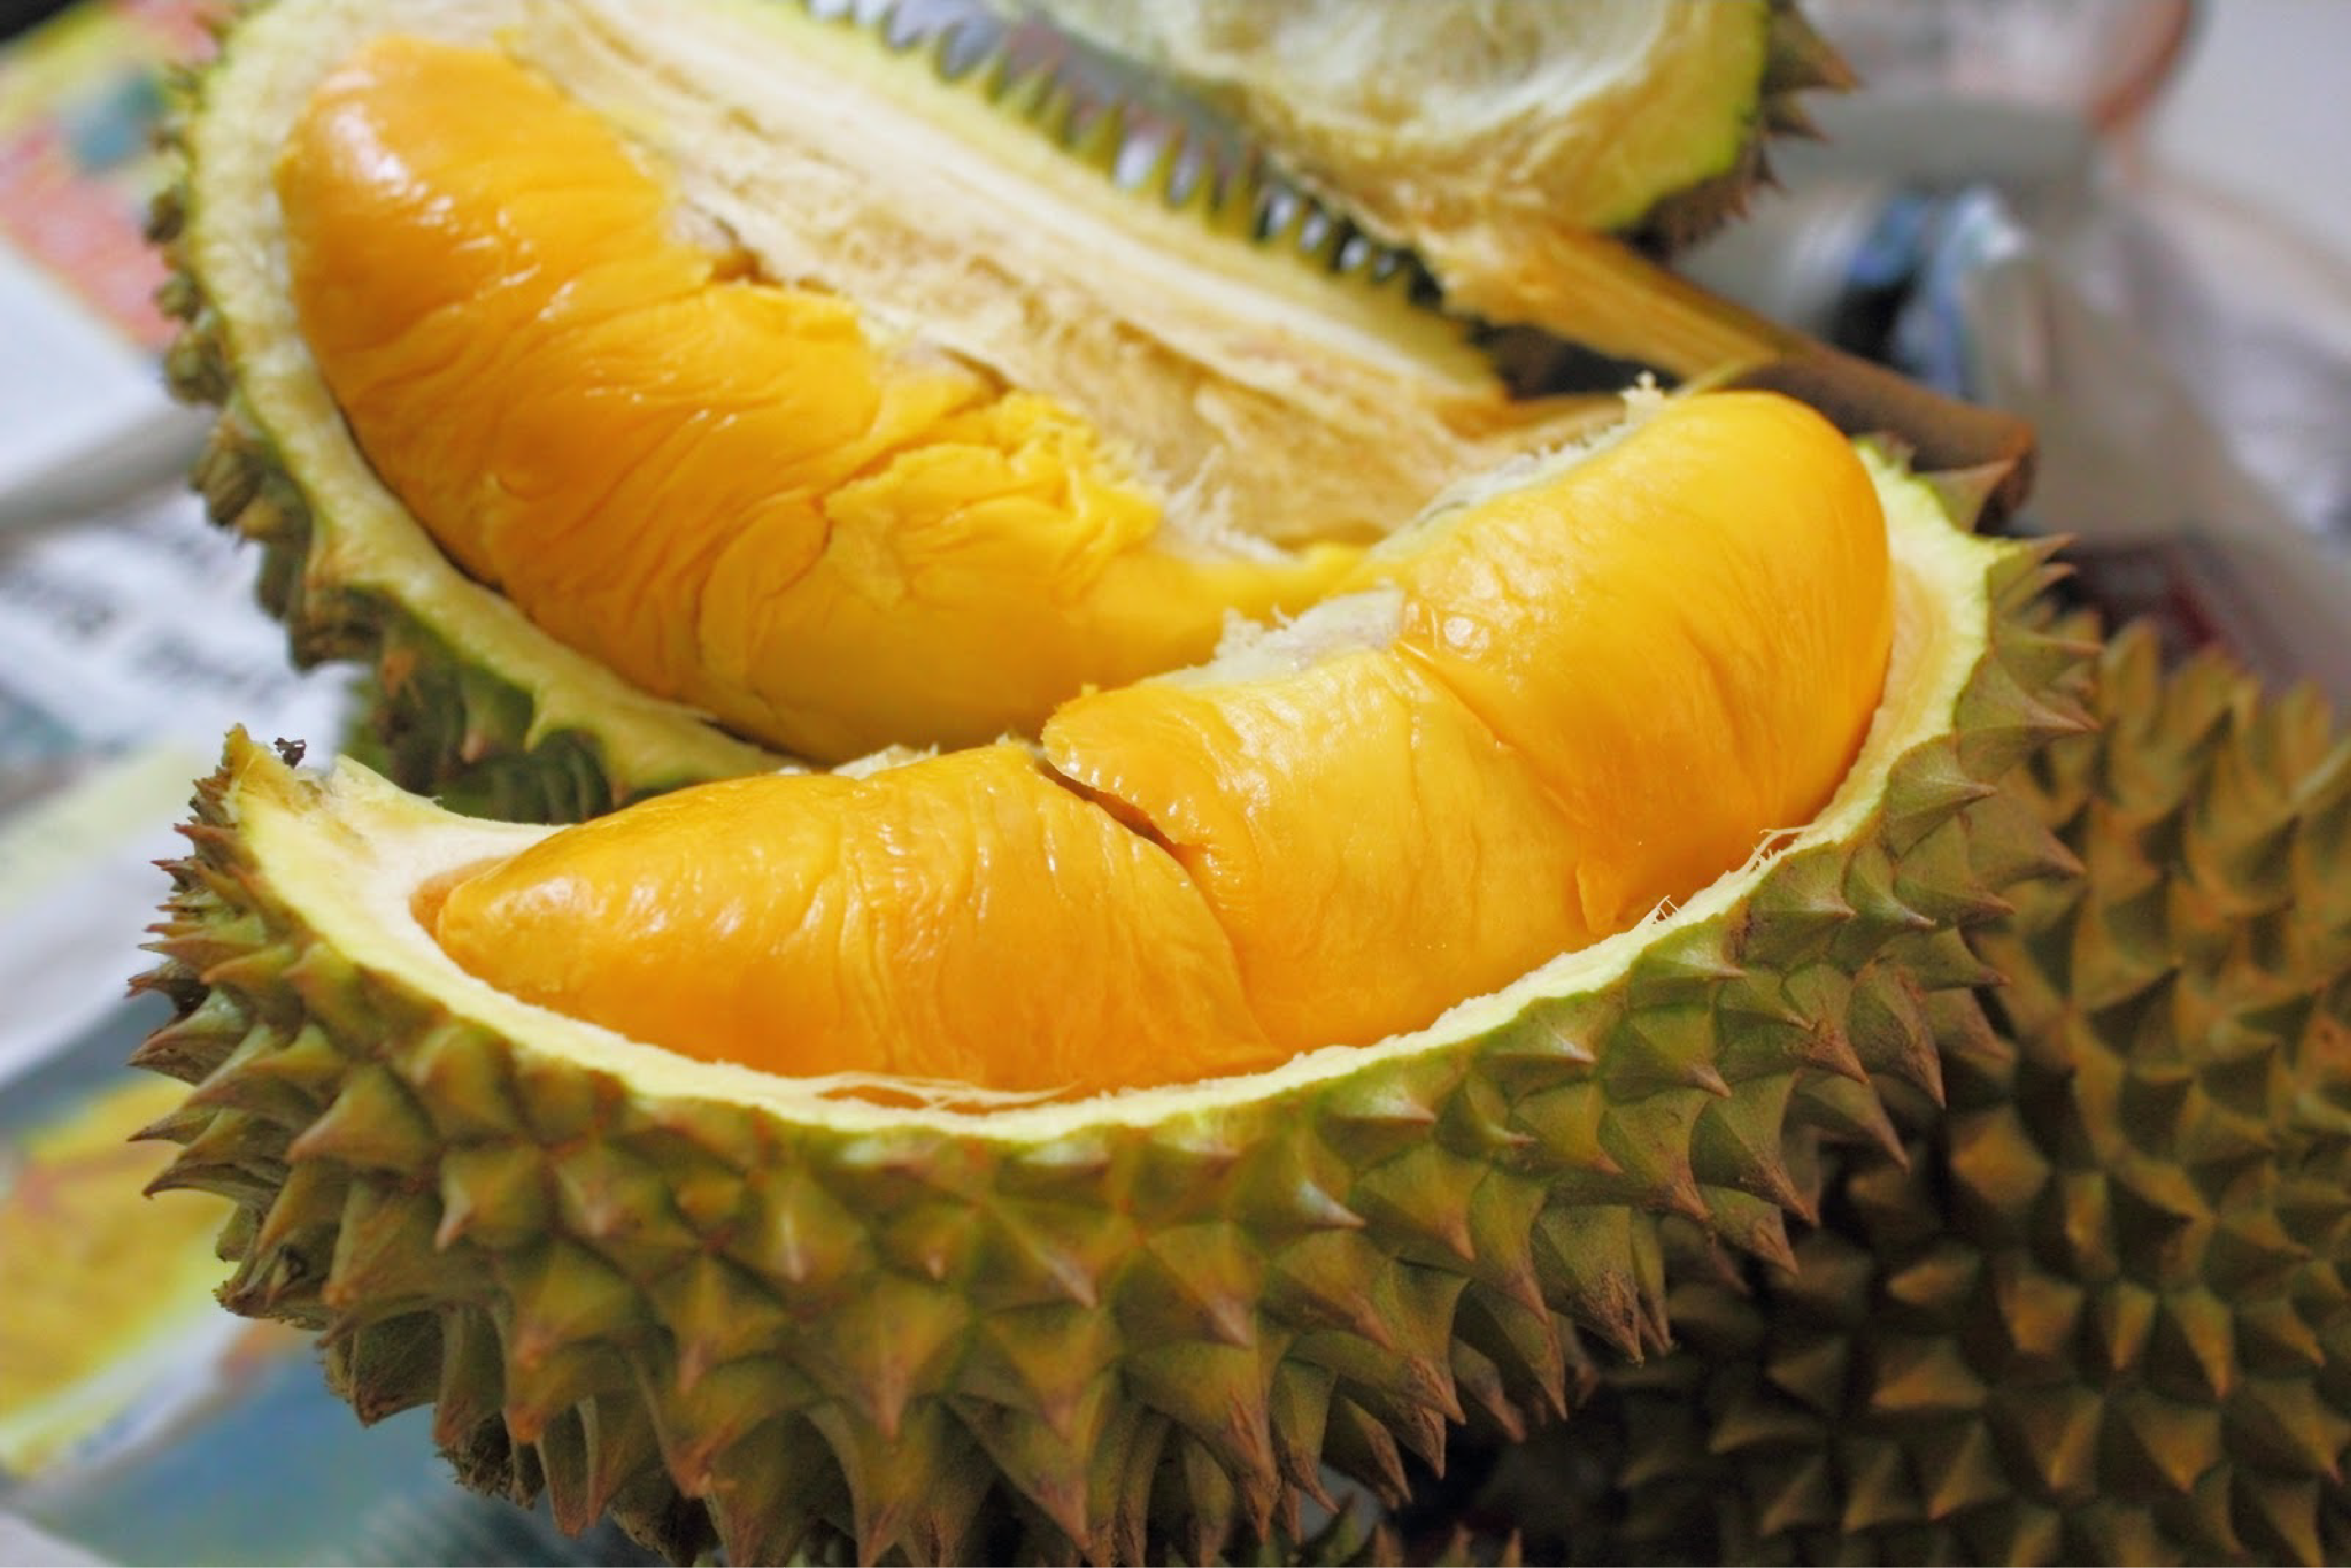 #DurianKing: Bukit Bintang Branch Opens, Free Durians For Visitors